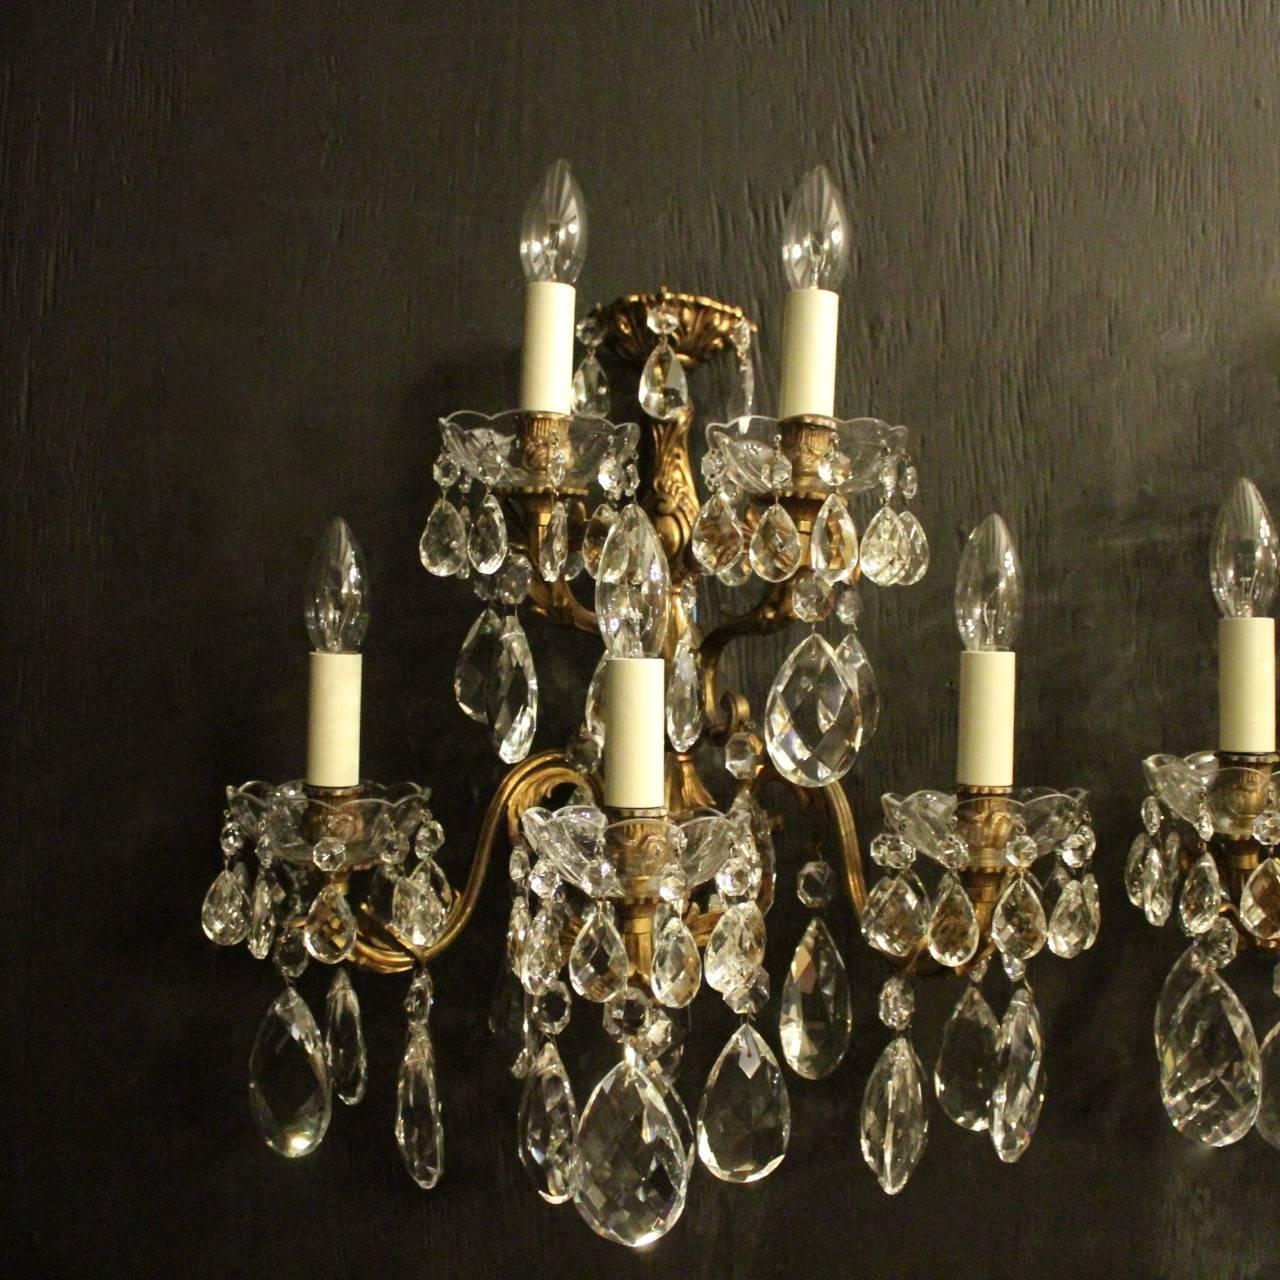 A large Italian pair of gilded cast bronze and crystal five-arm double tiered antique wall lights, the leaf scrolling arms with glass bobeches drip pans and bulbous leaf candle sconces, issuing from a foliated elongated backplate and decorated with